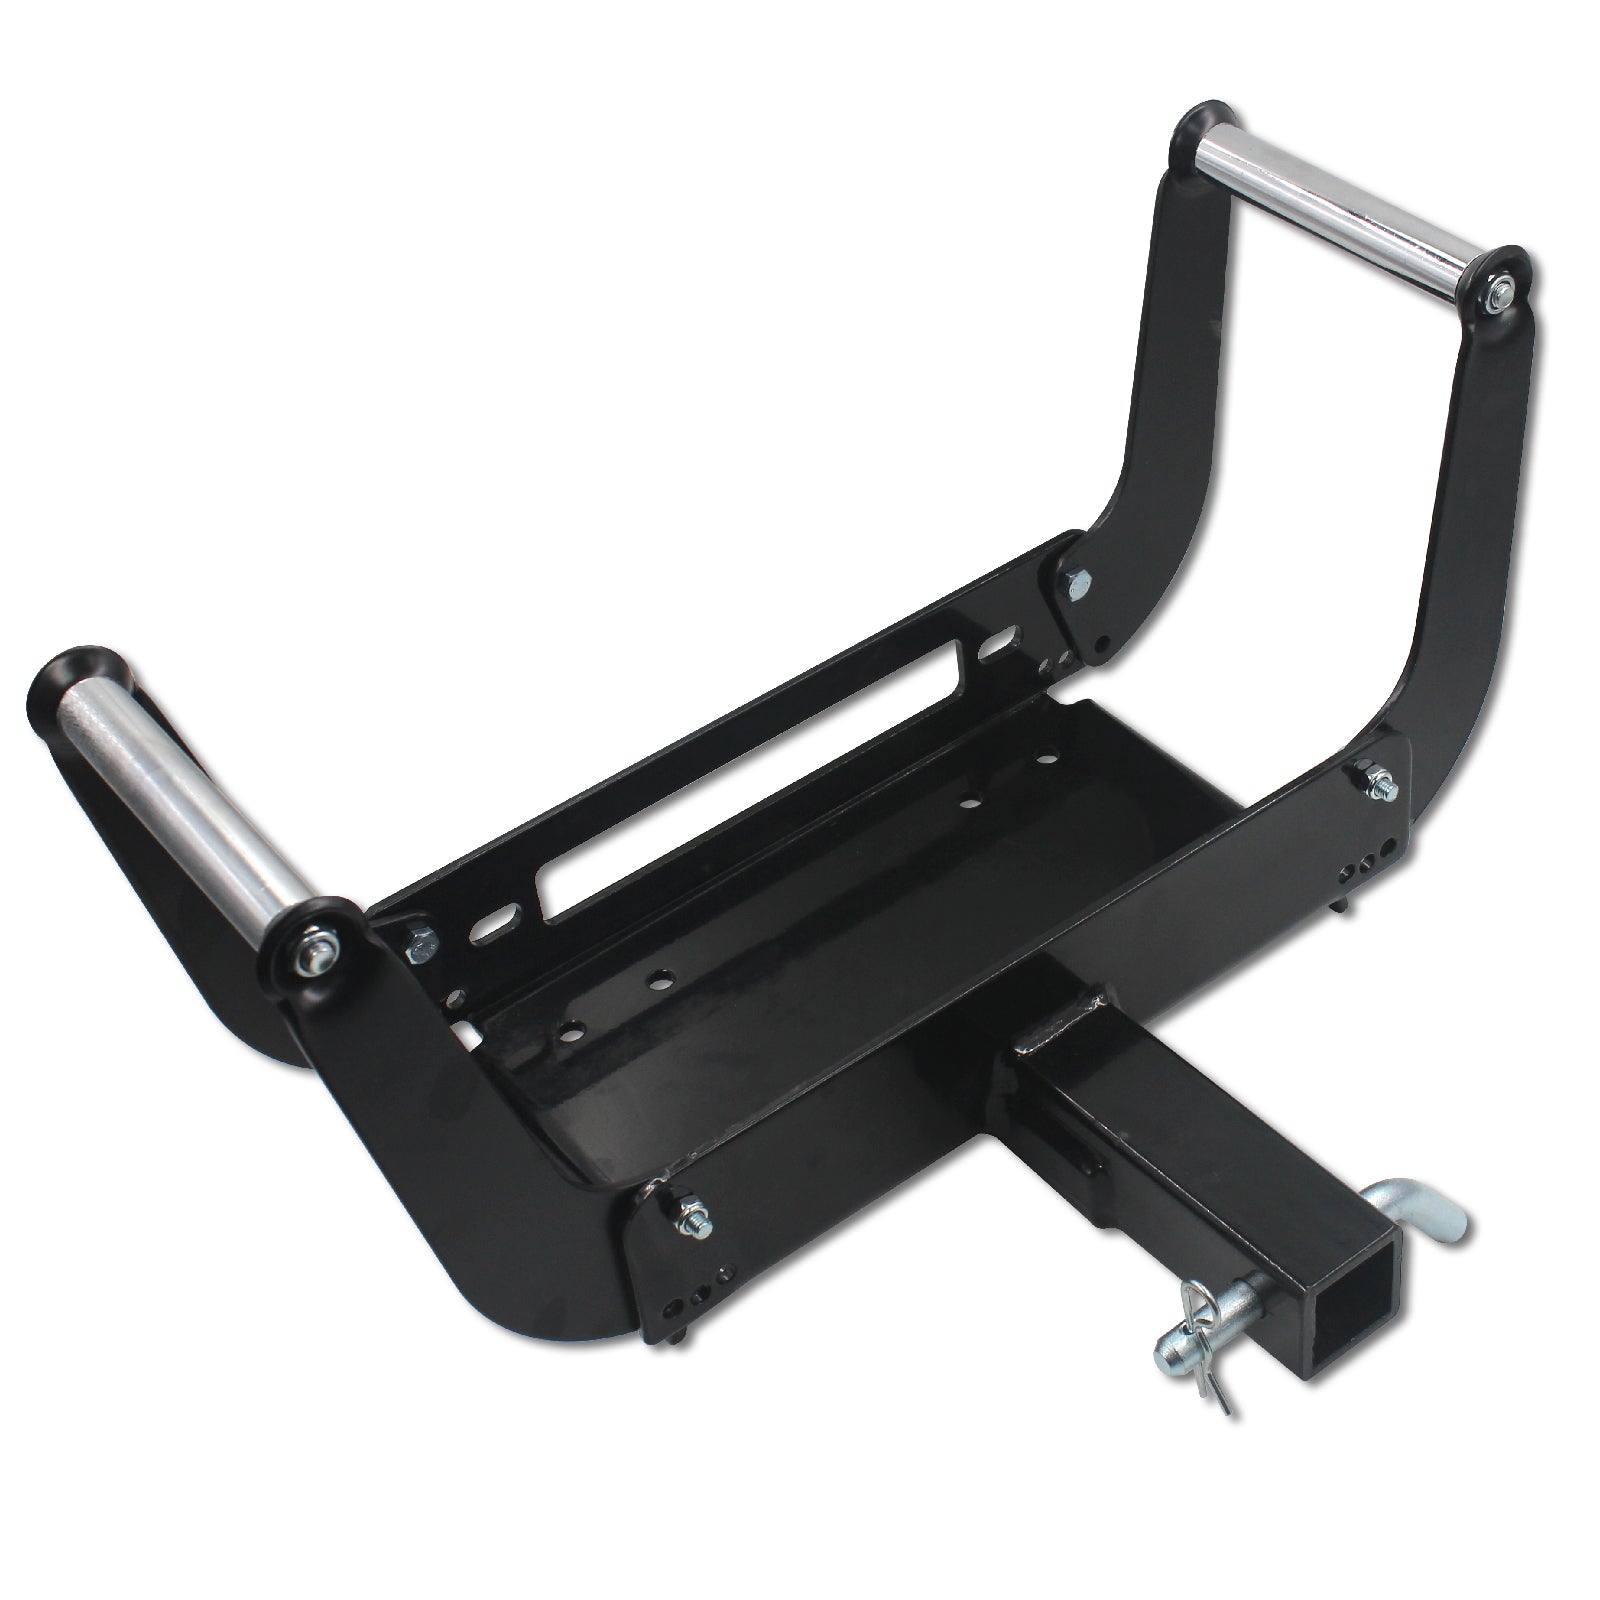 OPENROAD 2 Inches 15,000 lbs Capacity Winch Mount Receiver Hitch Winch Mounting Plate winch bracket OPENROAD   